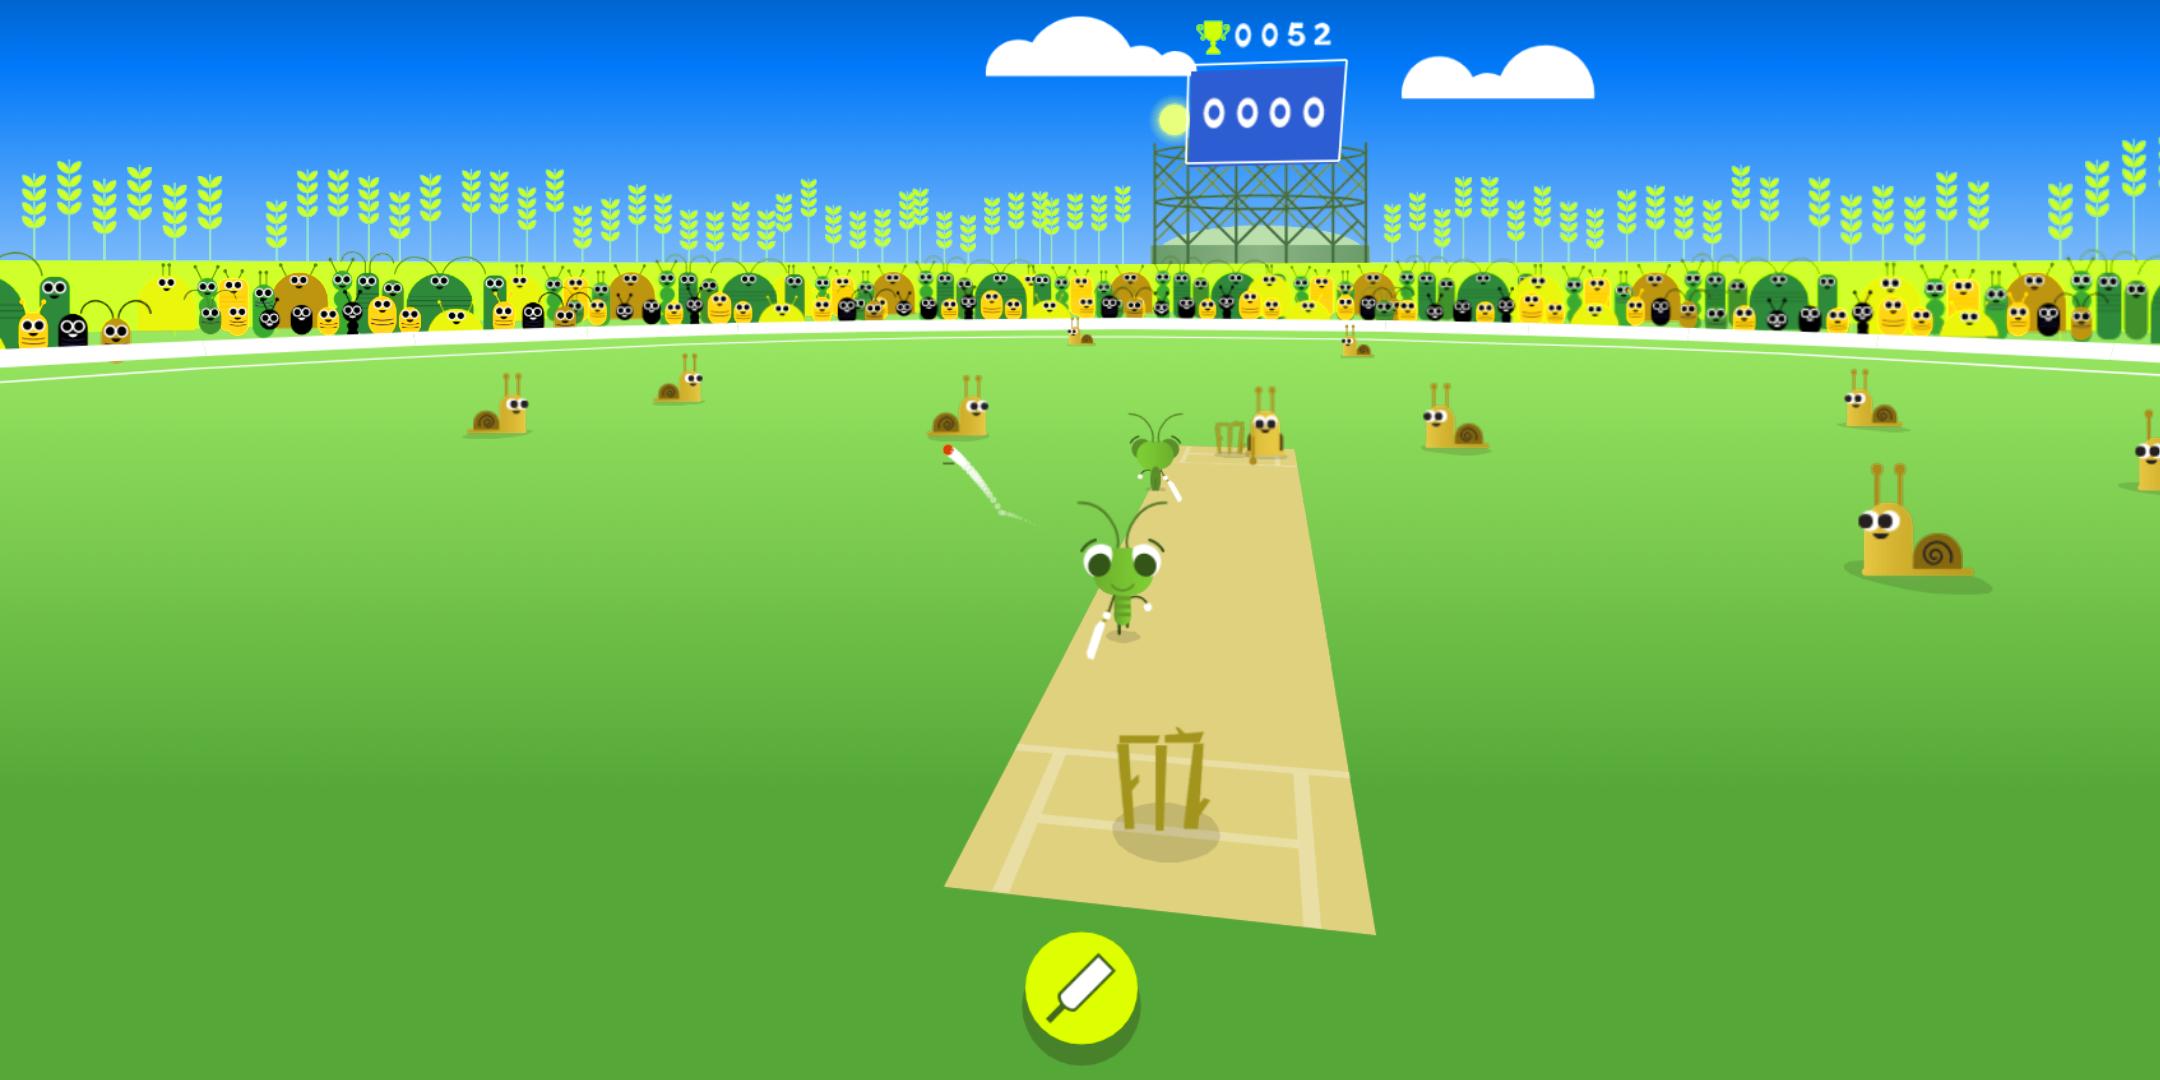 Doodle Cricket for Android - APK Download